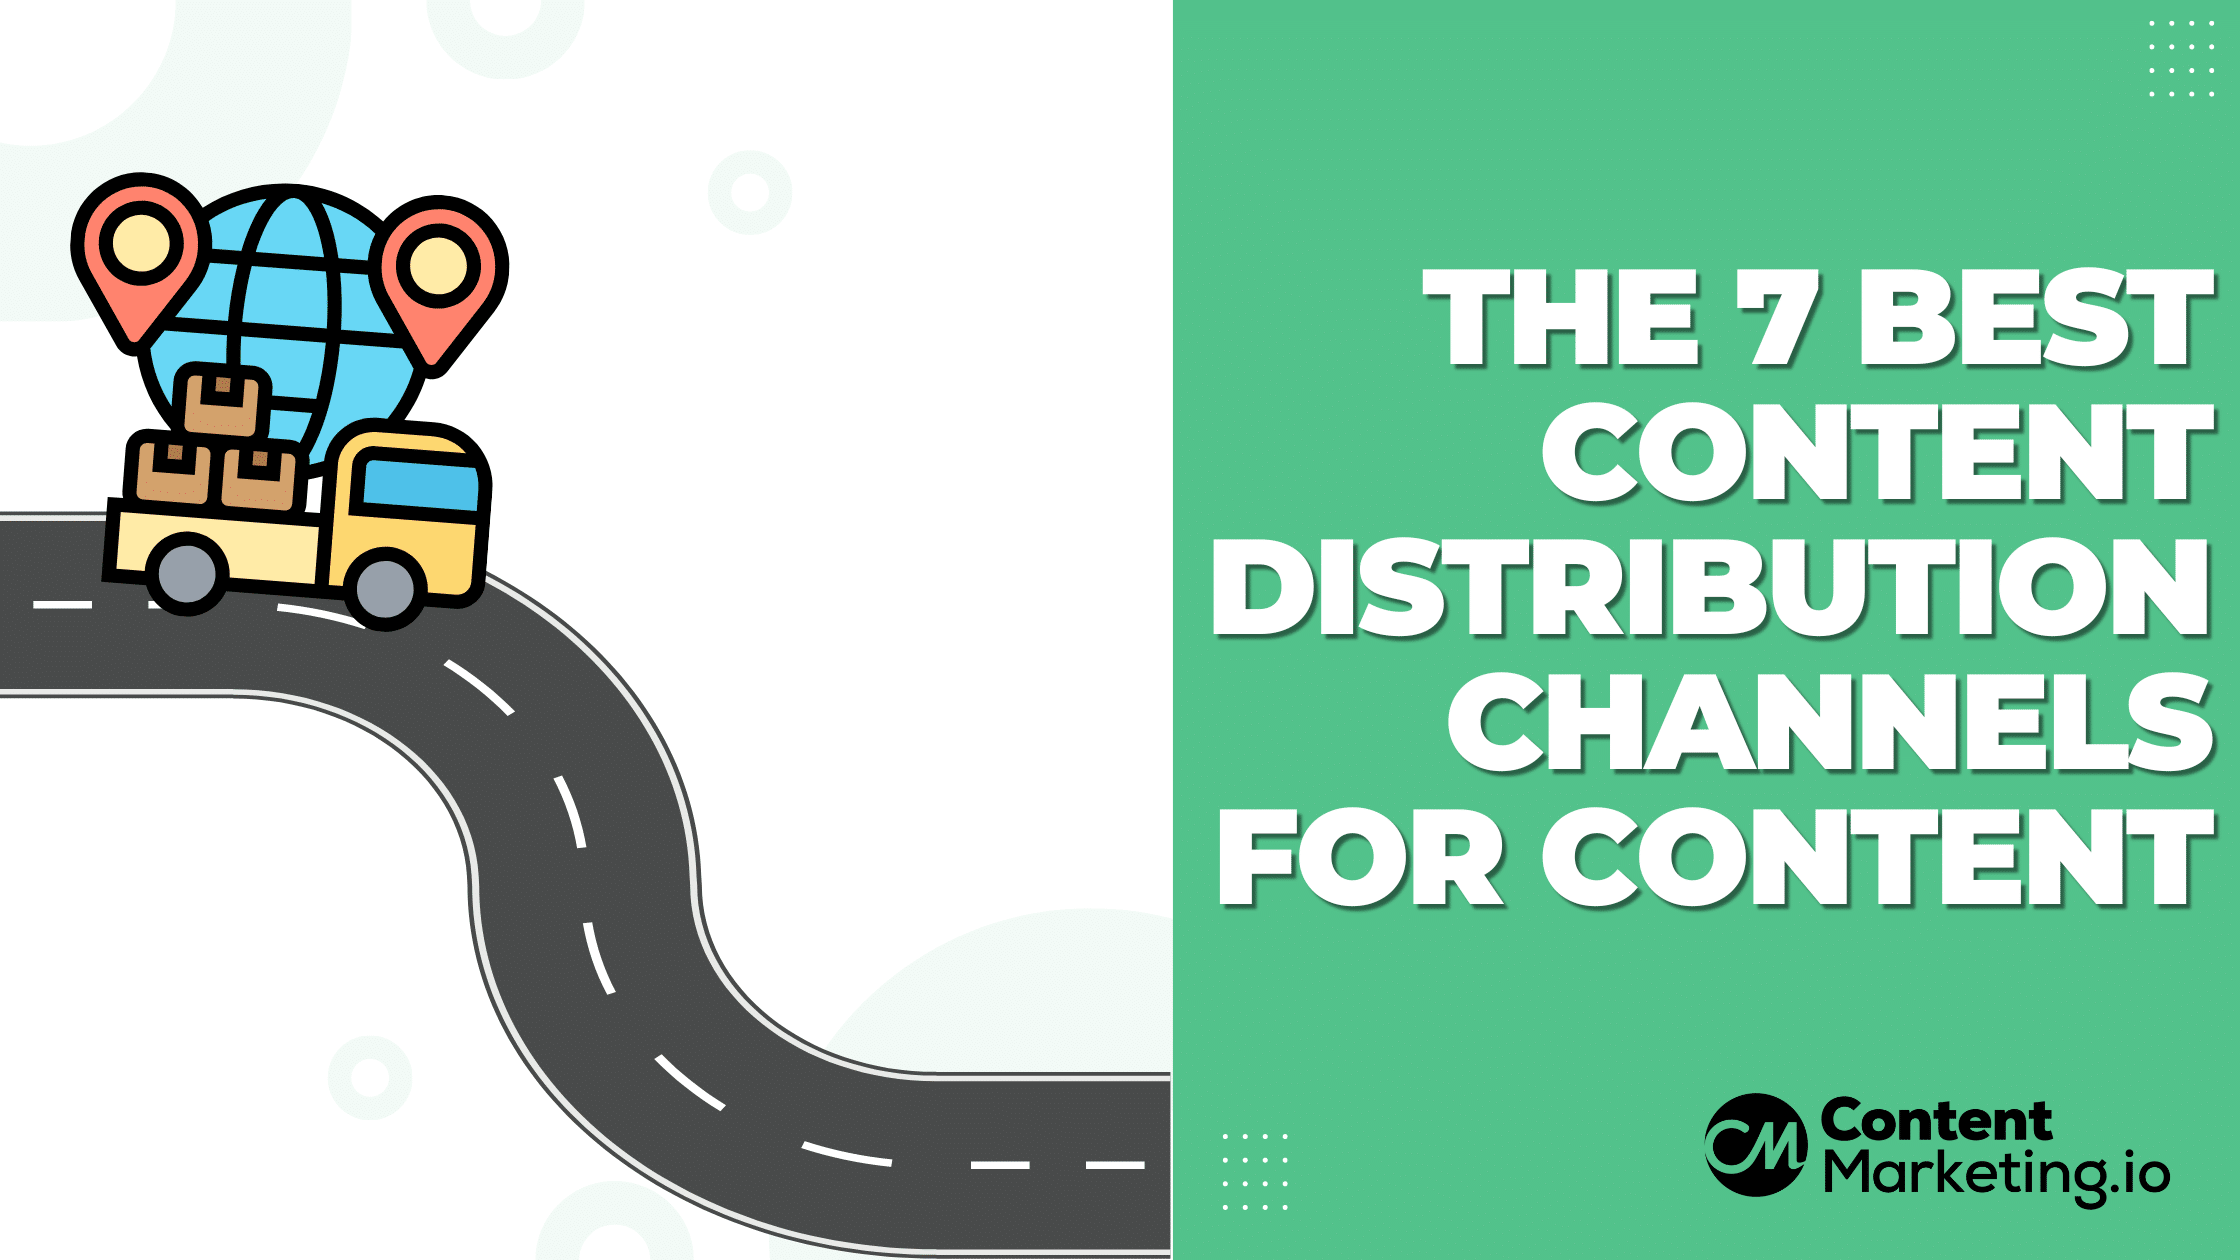 The 7 Best Content Distribution Channels For Content